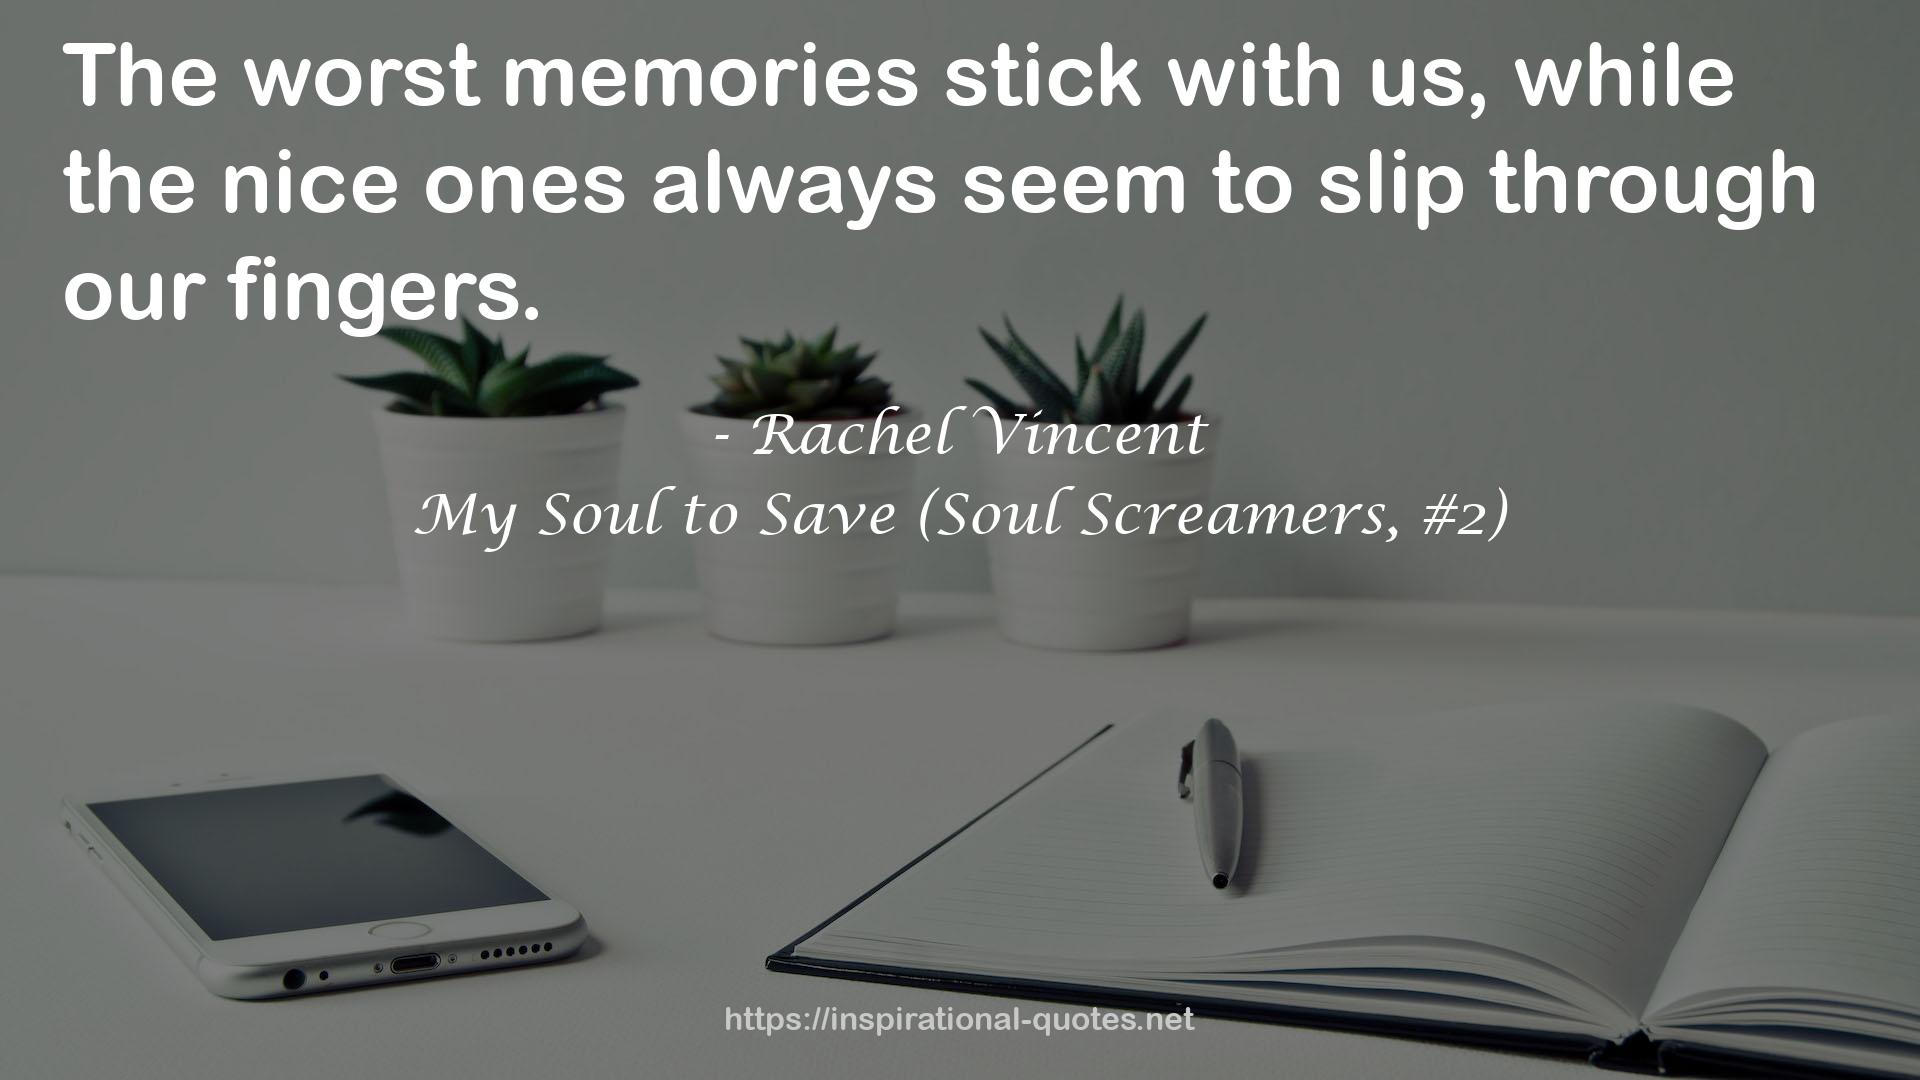 My Soul to Save (Soul Screamers, #2) QUOTES